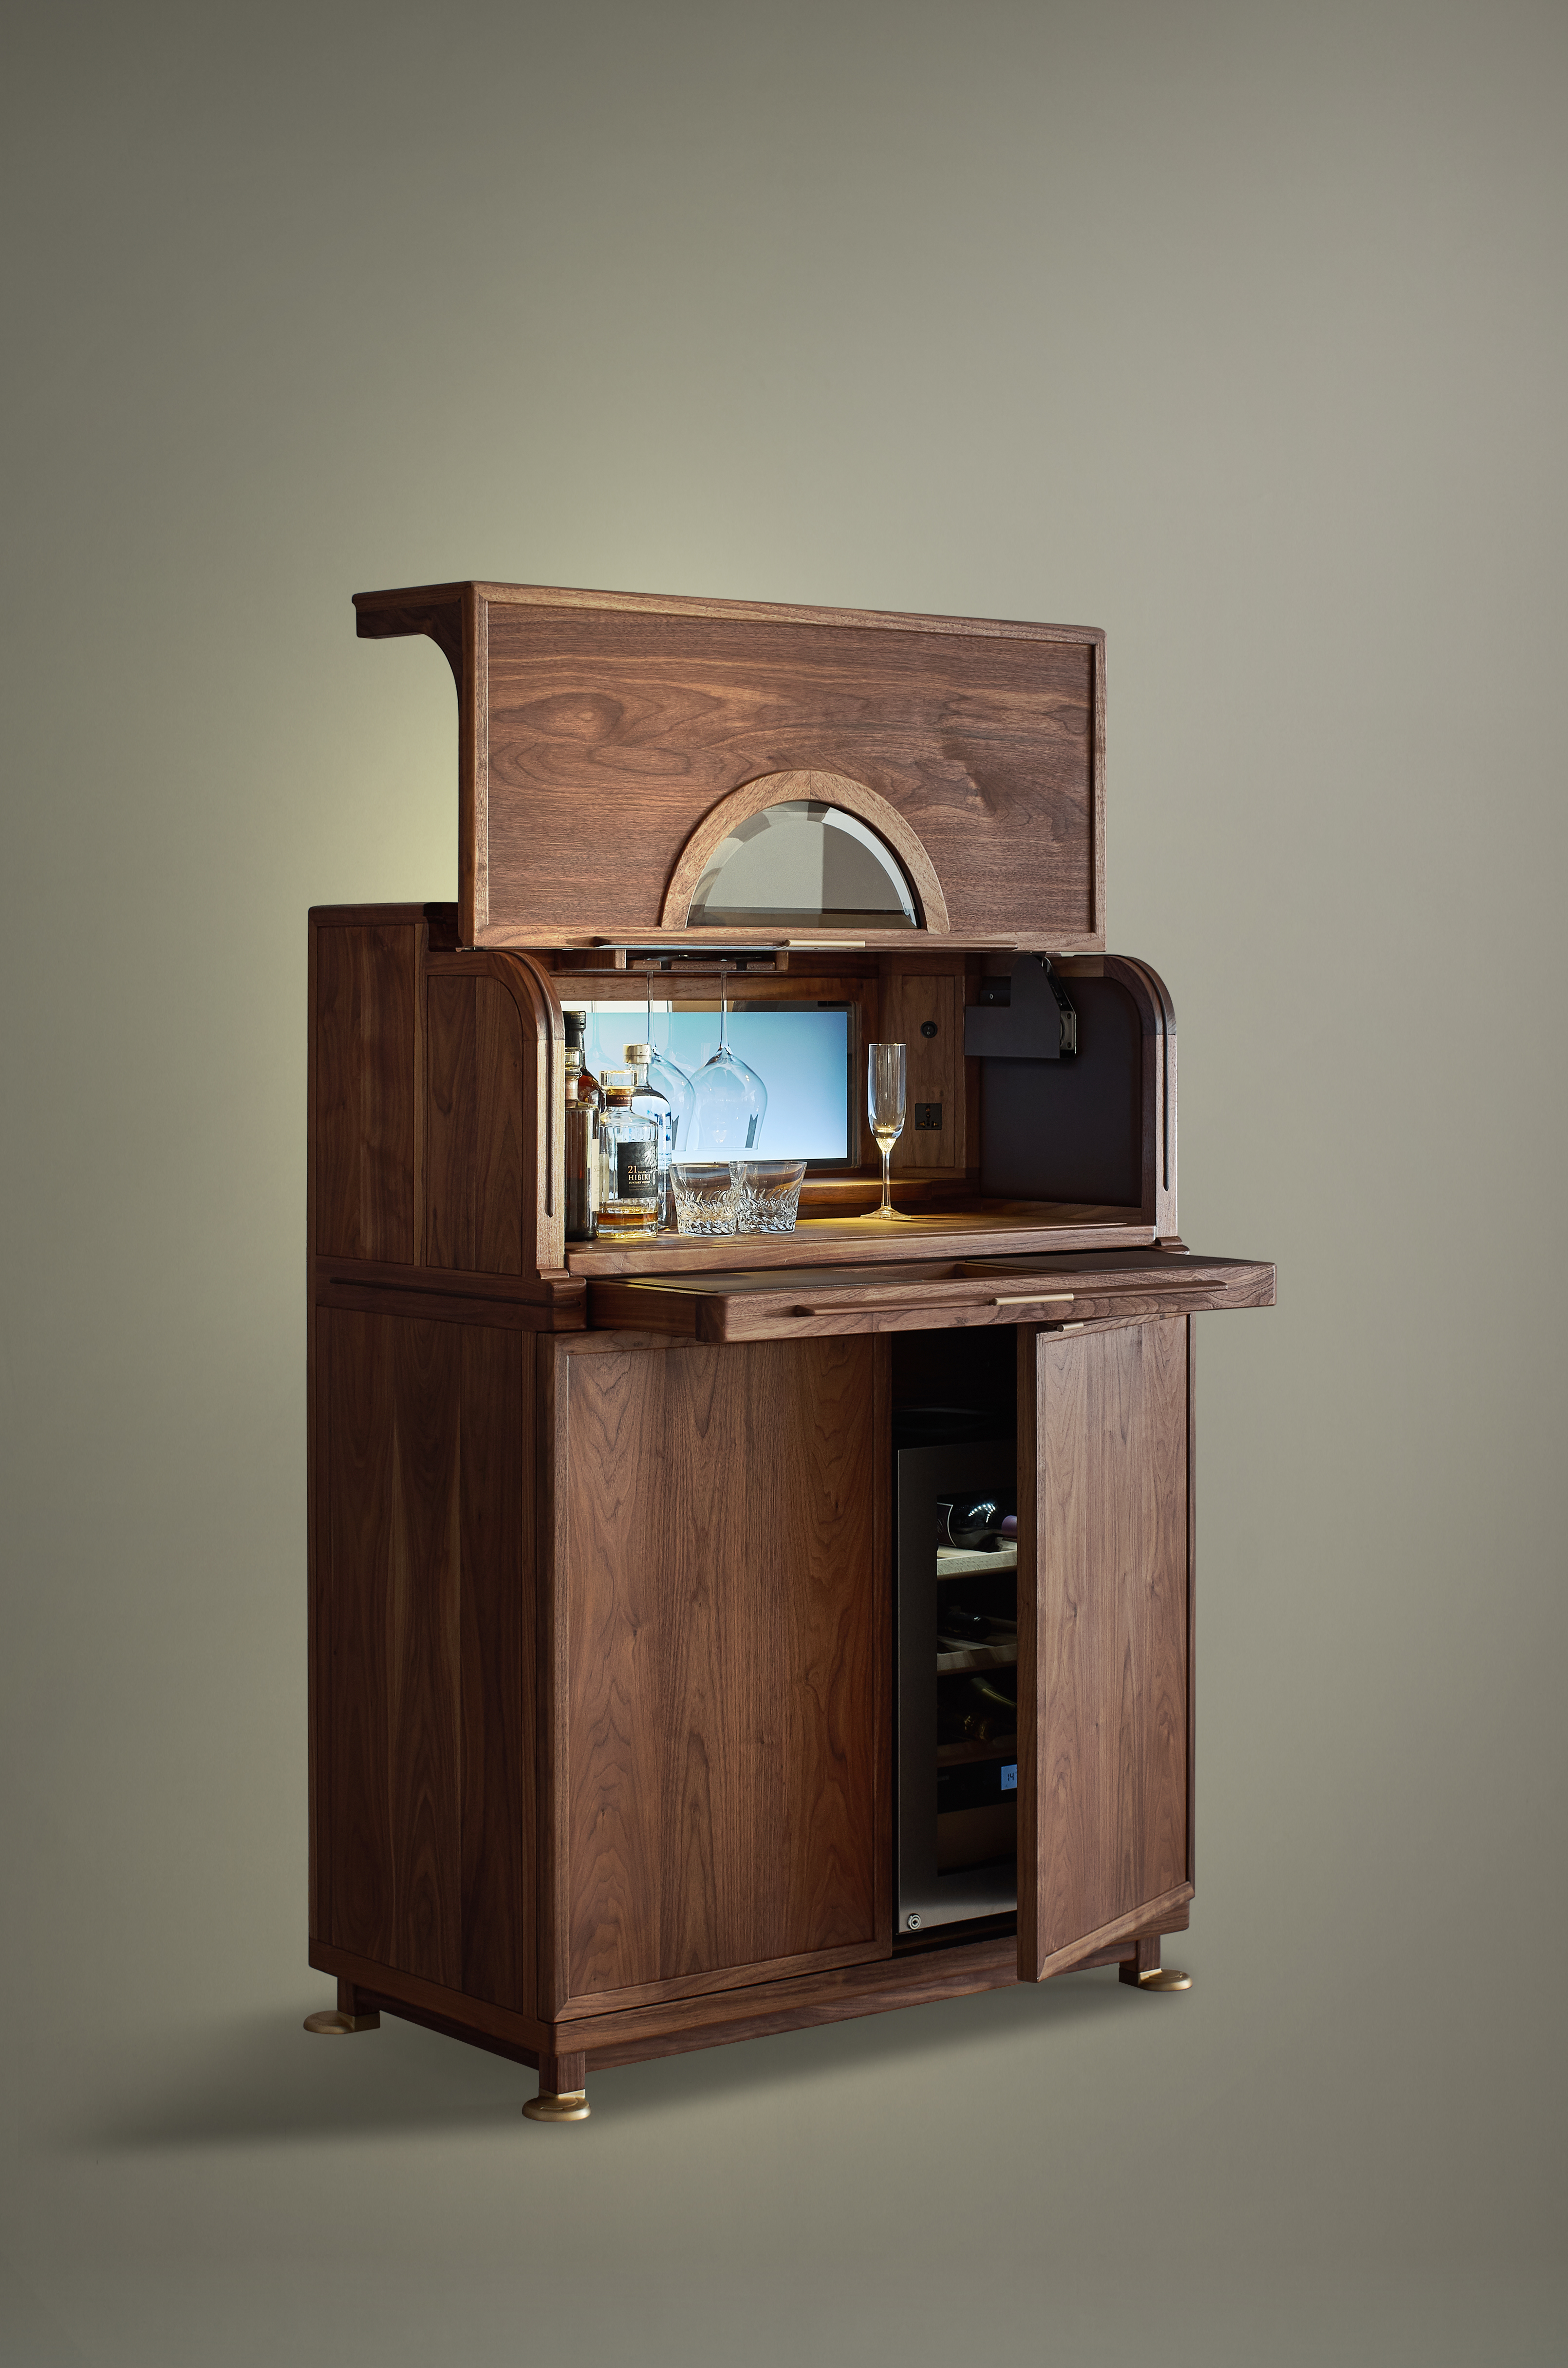 The "China Box" wine cabinet made by American walnut